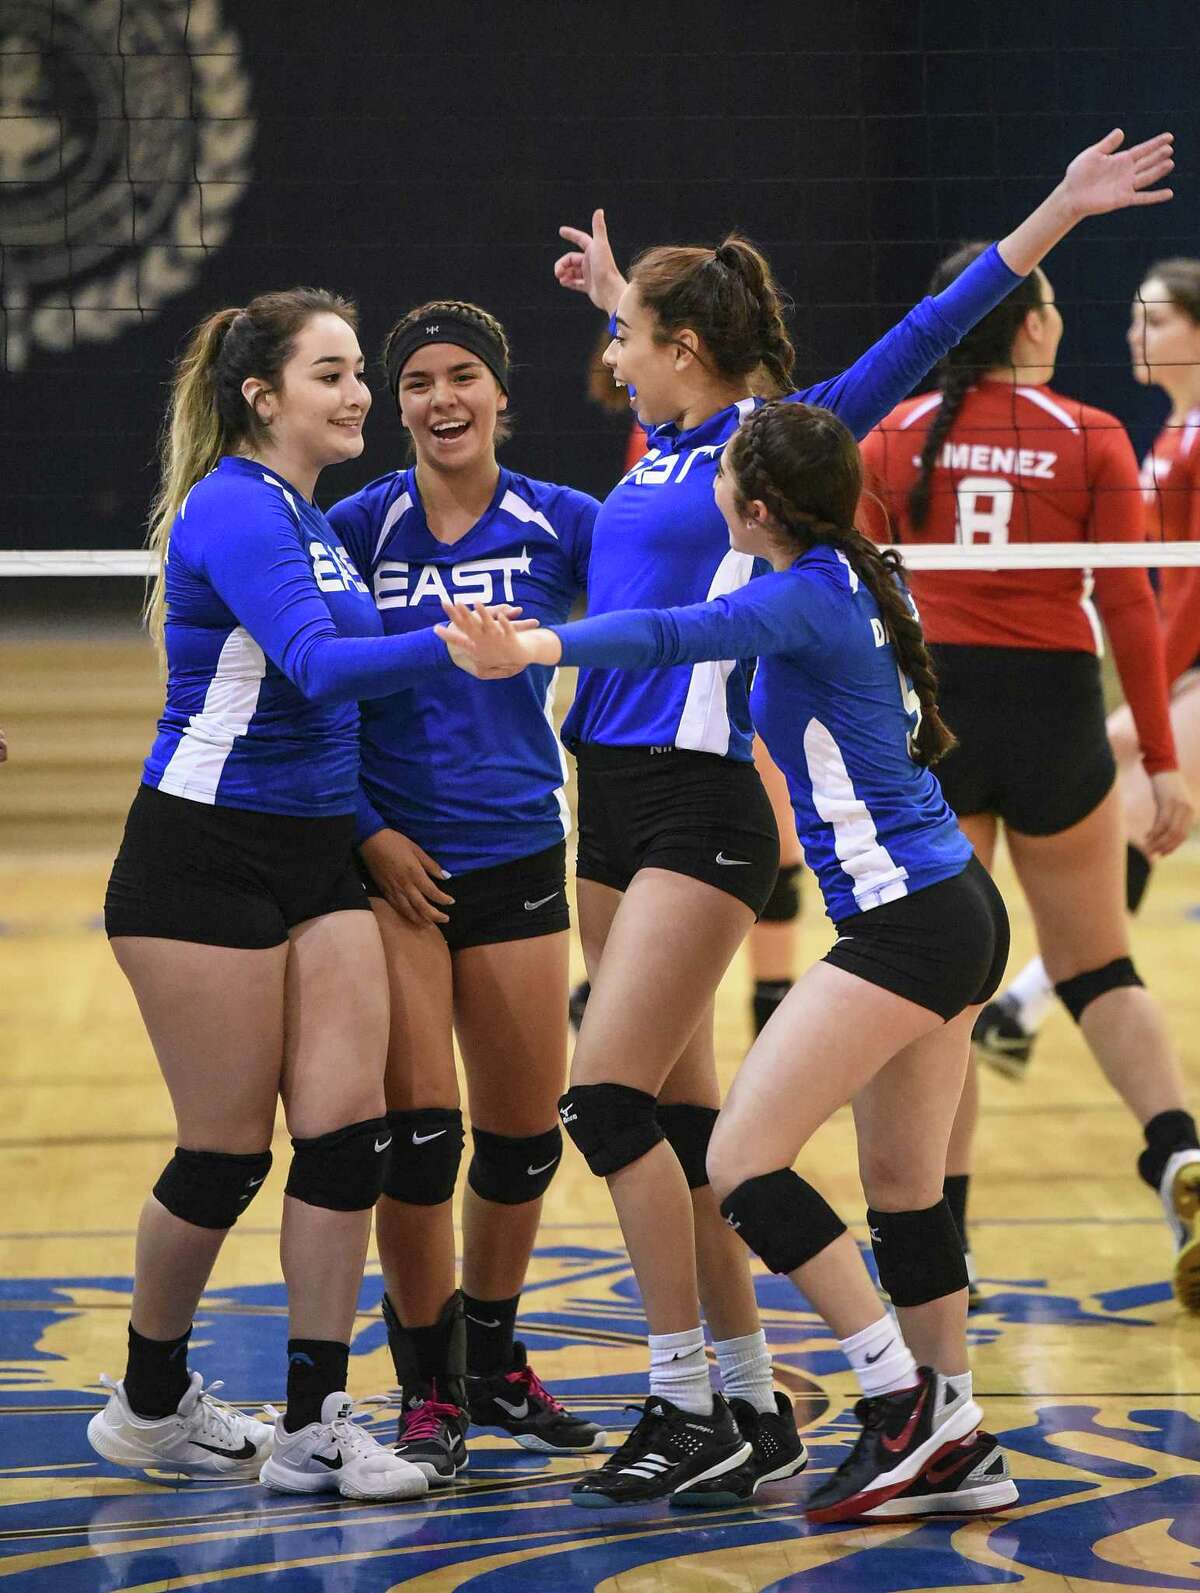 The East team celebrates after scoring a point during the Bosom Buddies All-Star game at St. Augustine. The East won with a 3-0 (25-6, 25-12, 26-24) sweep.